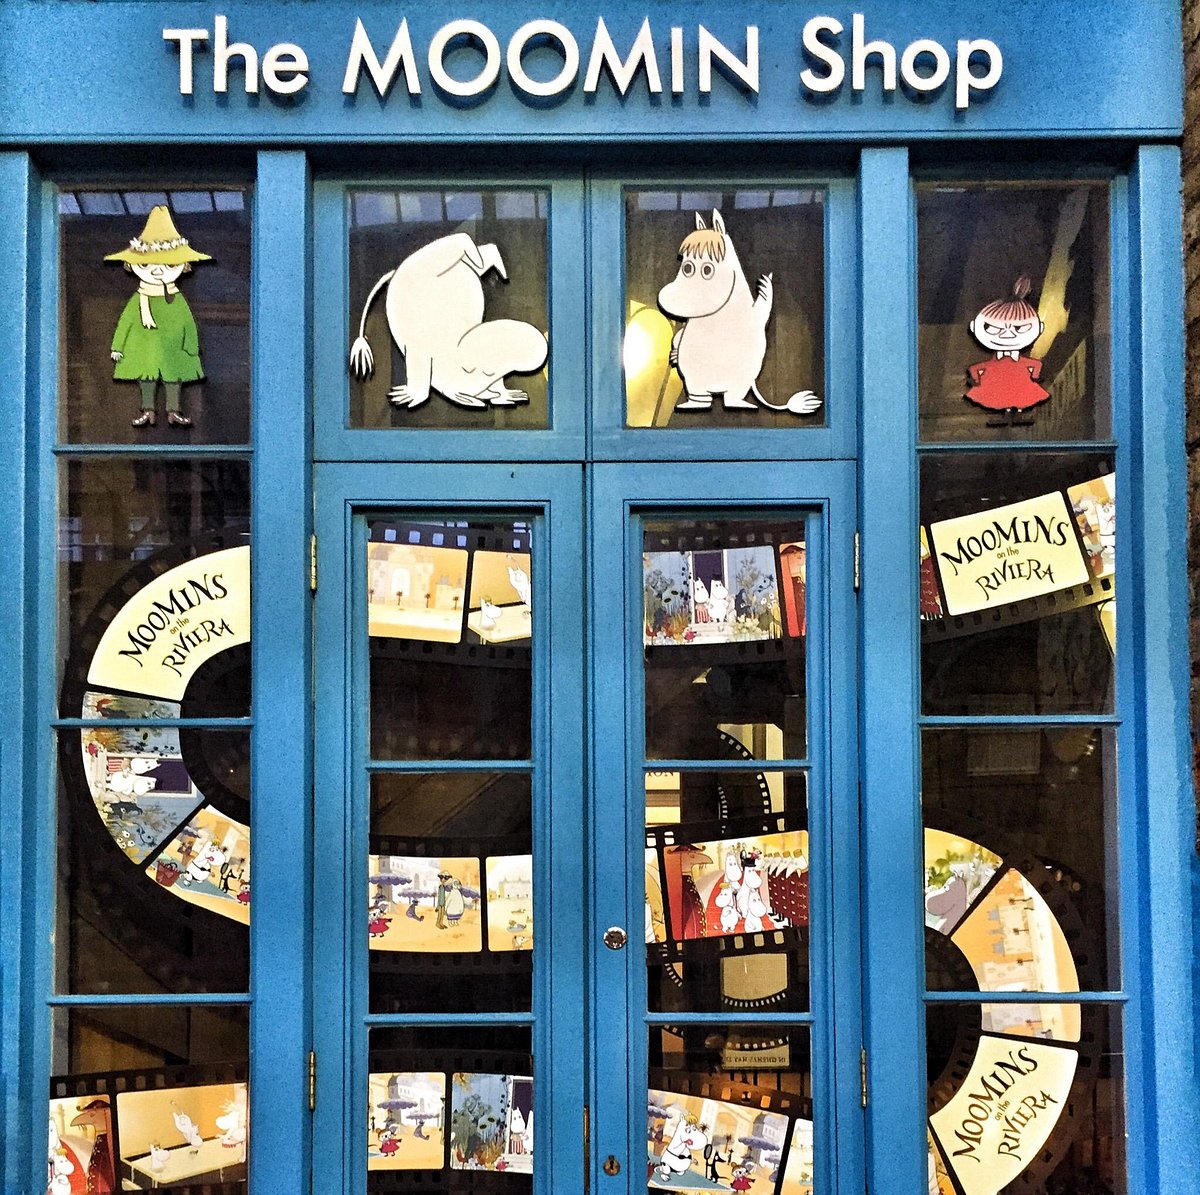 The Moomin shop London. There are shops in london